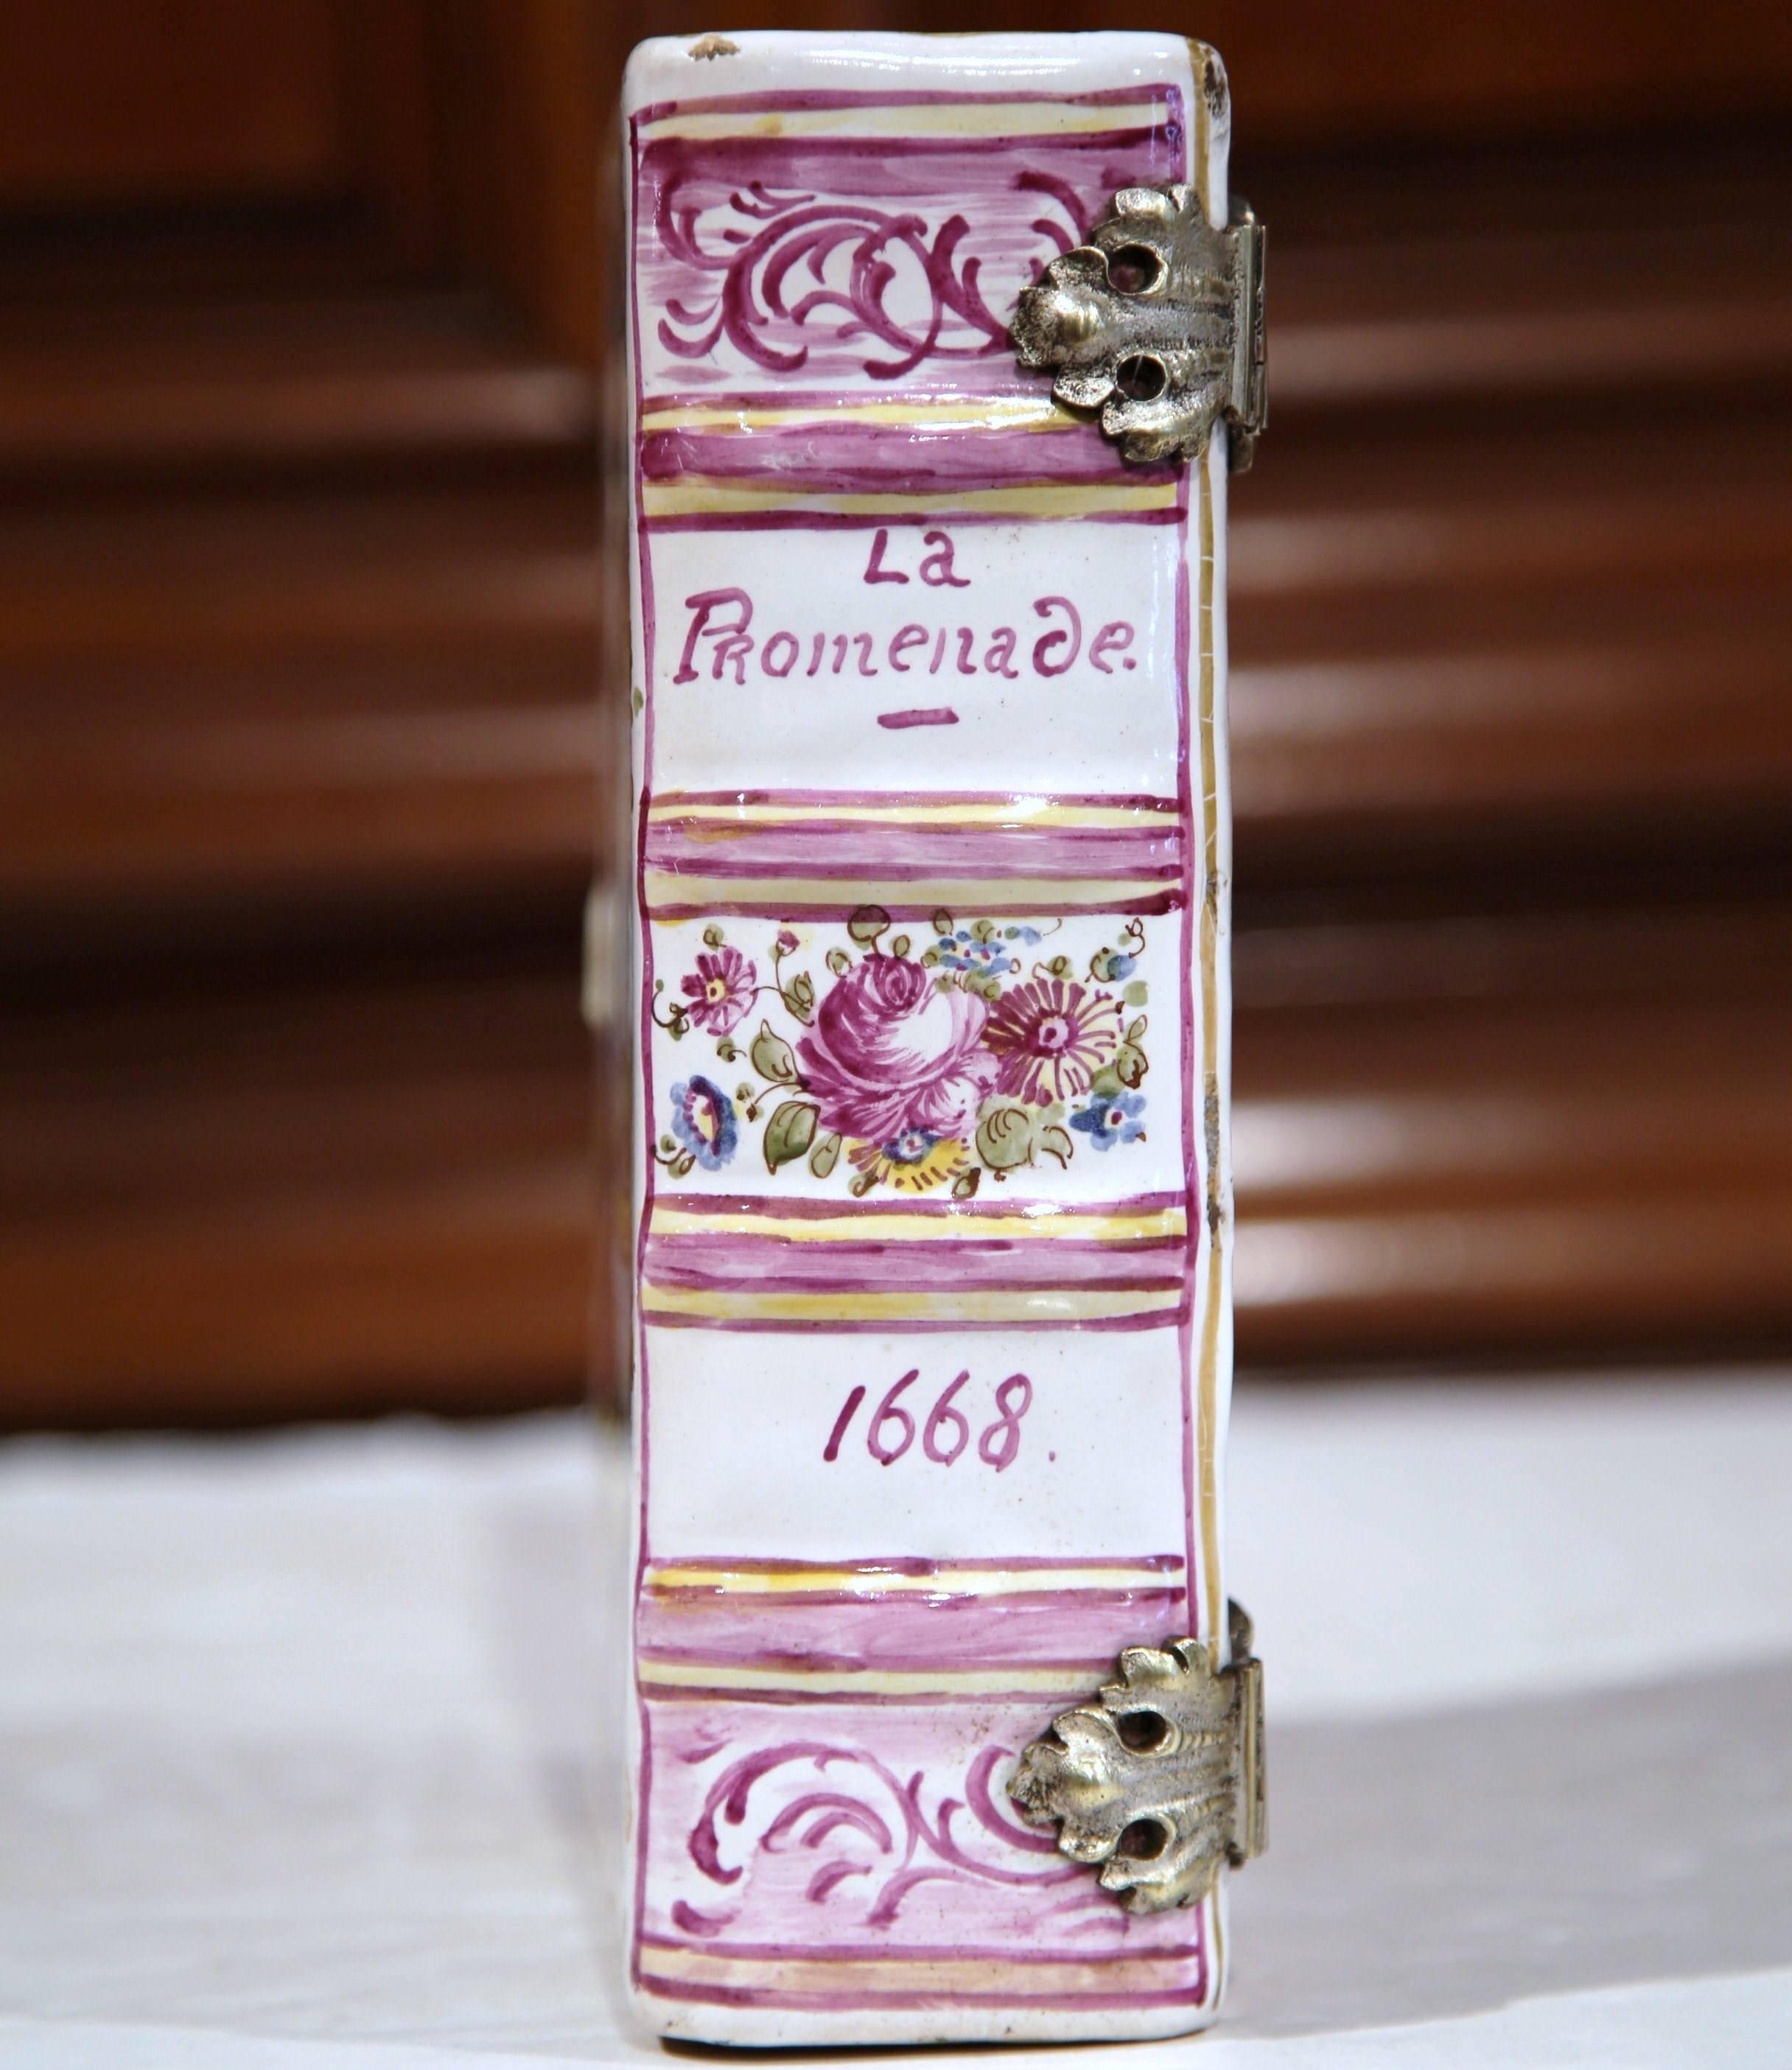 Renaissance Early 19th Century French Hand-Painted Porcelain Jewelry Box Shaped as a Book